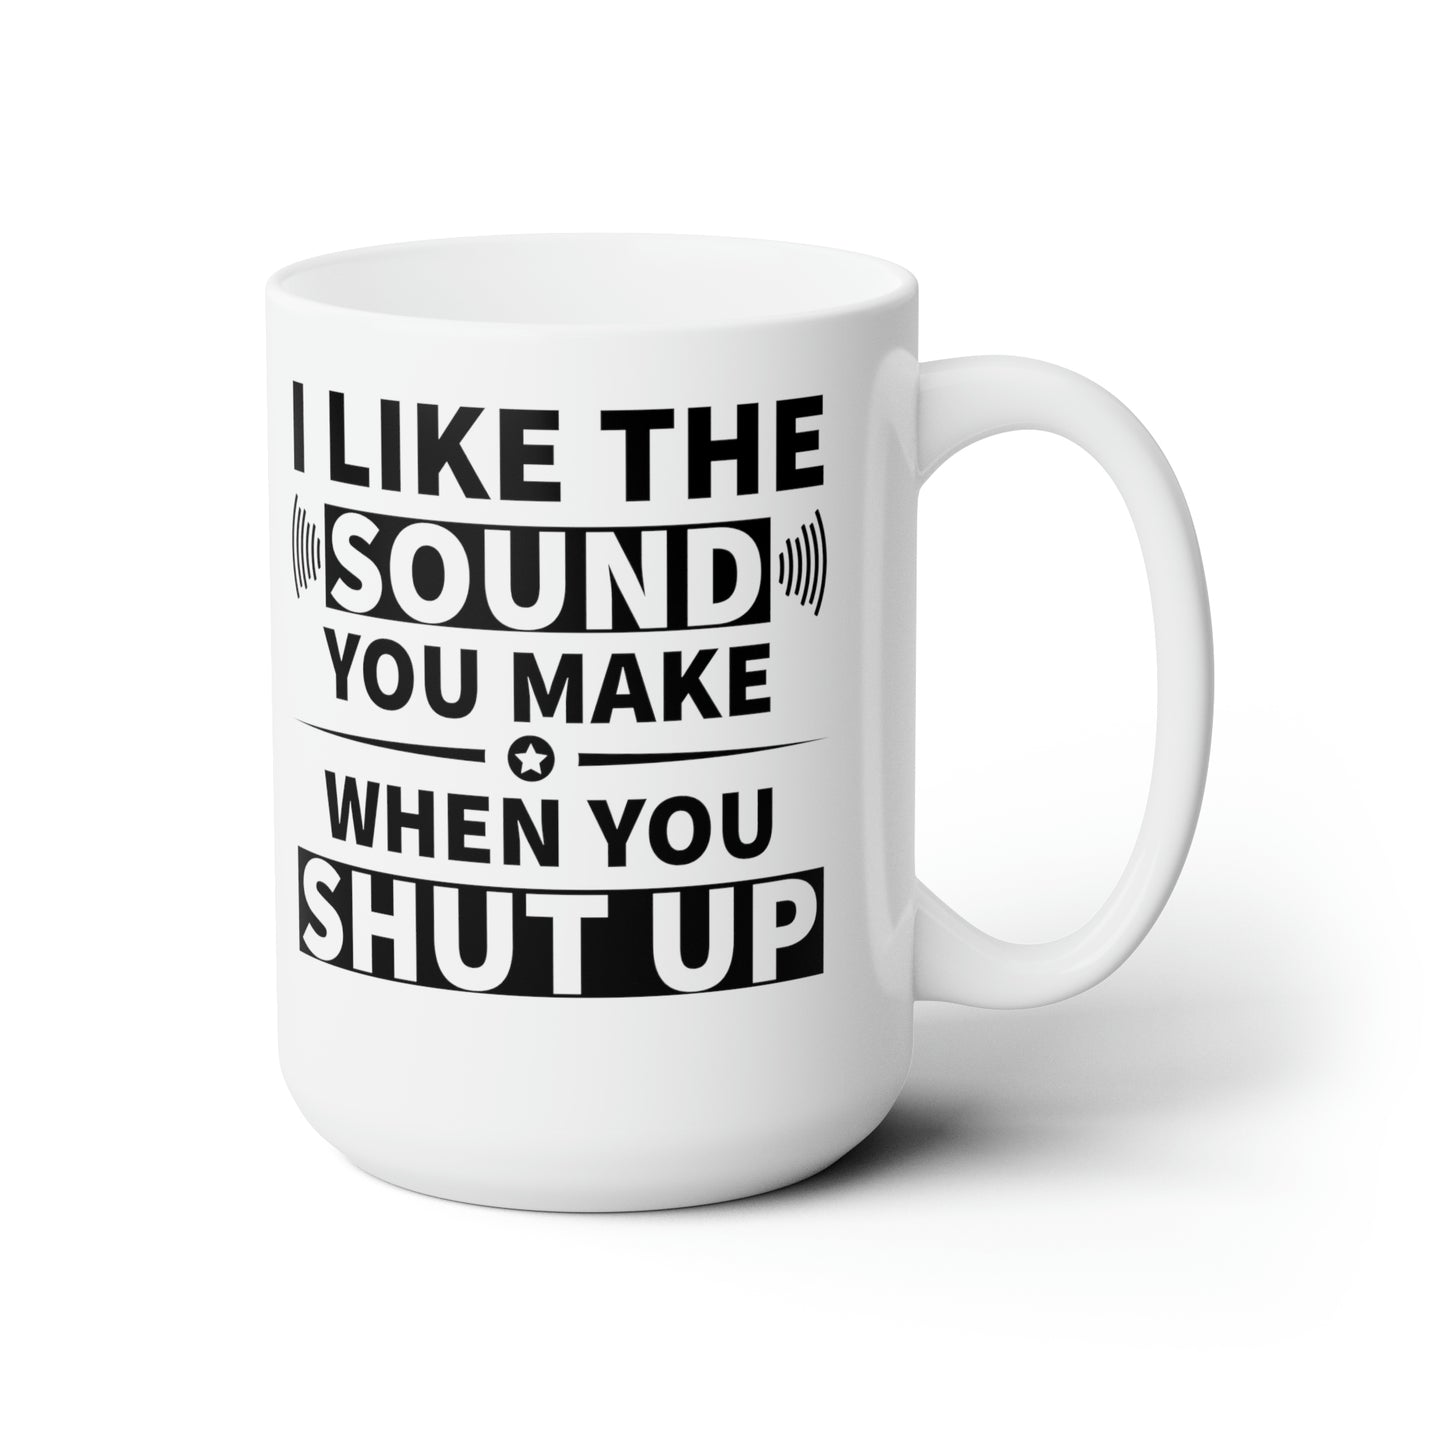 Sarcastic Humor Coffee Mug For Shut Up Hot Tea Cup For Funny Gift Idea